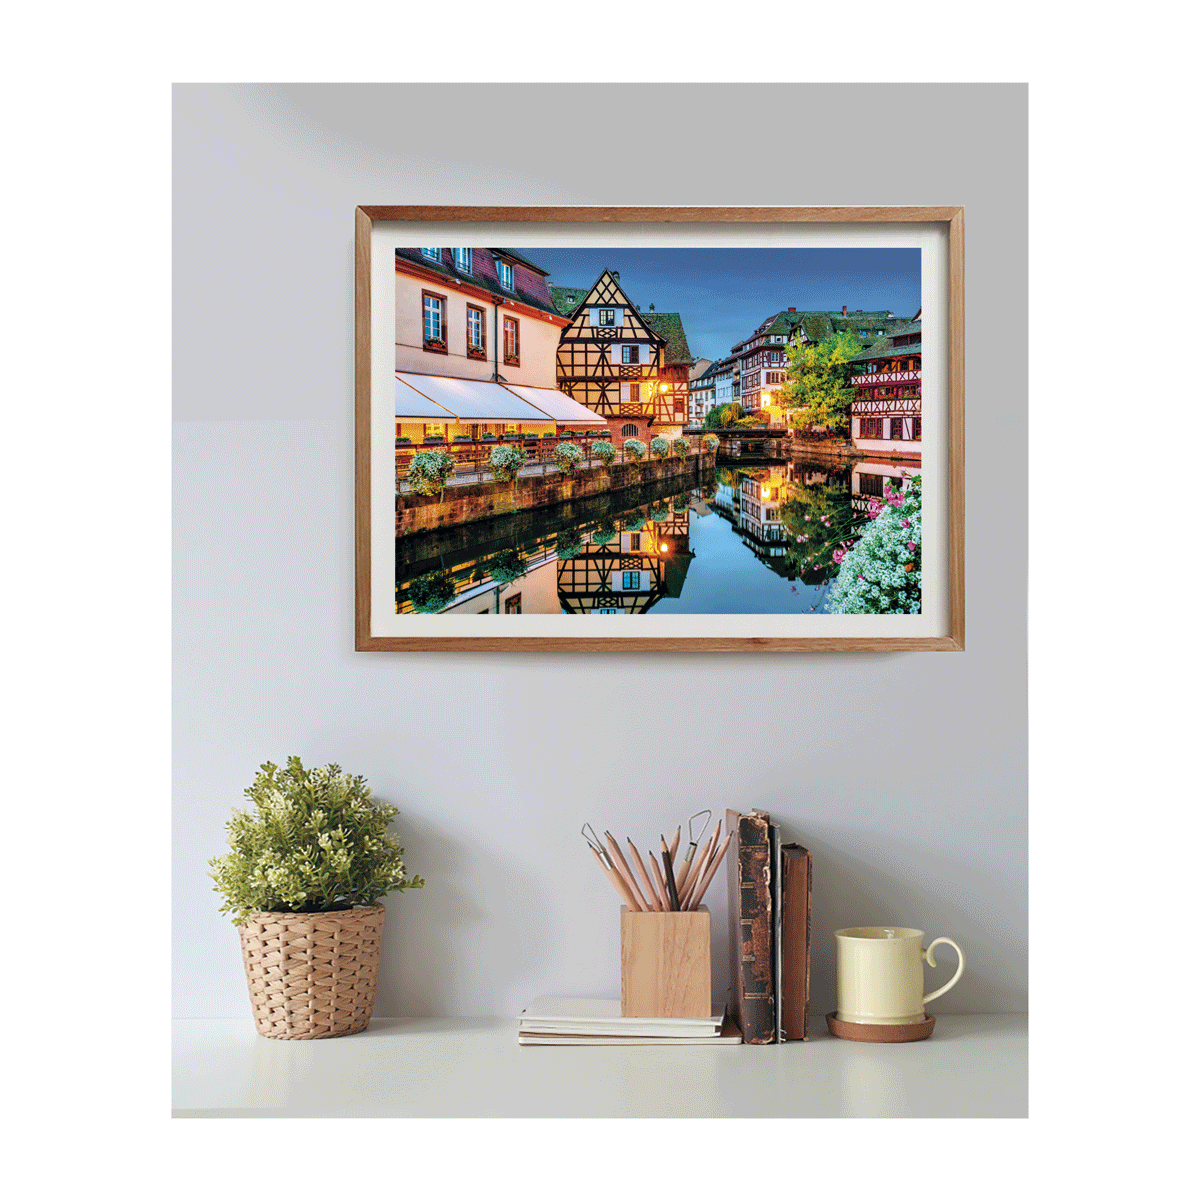 Clementoni puzzle high quality collection - strasbourg old town - 500 pezzi, puzzle adulti - CLEMENTONI